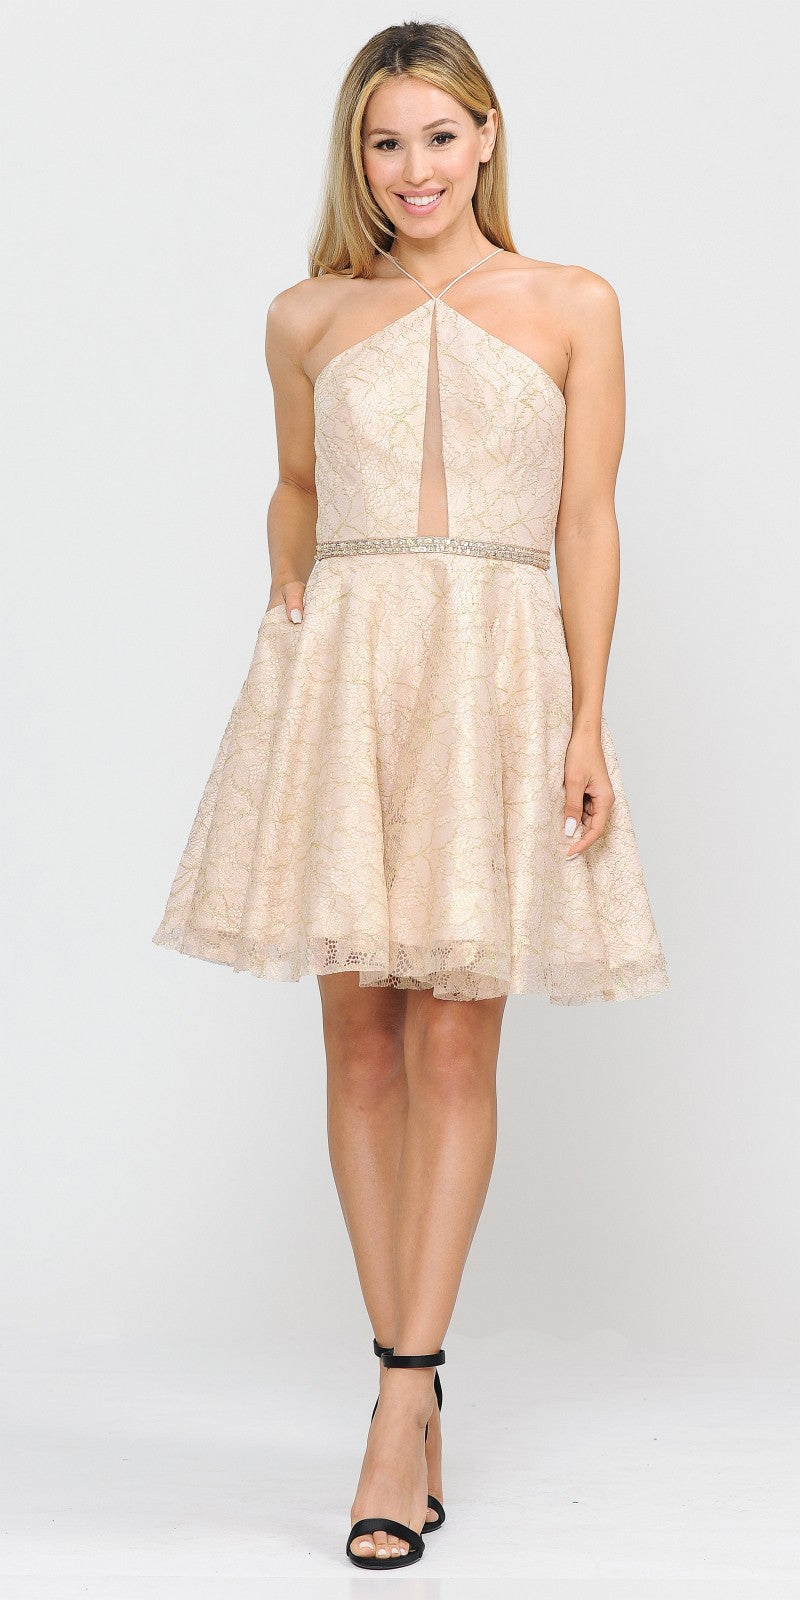 Short Halter Homecoming Dress Cut-Out Back Champagne